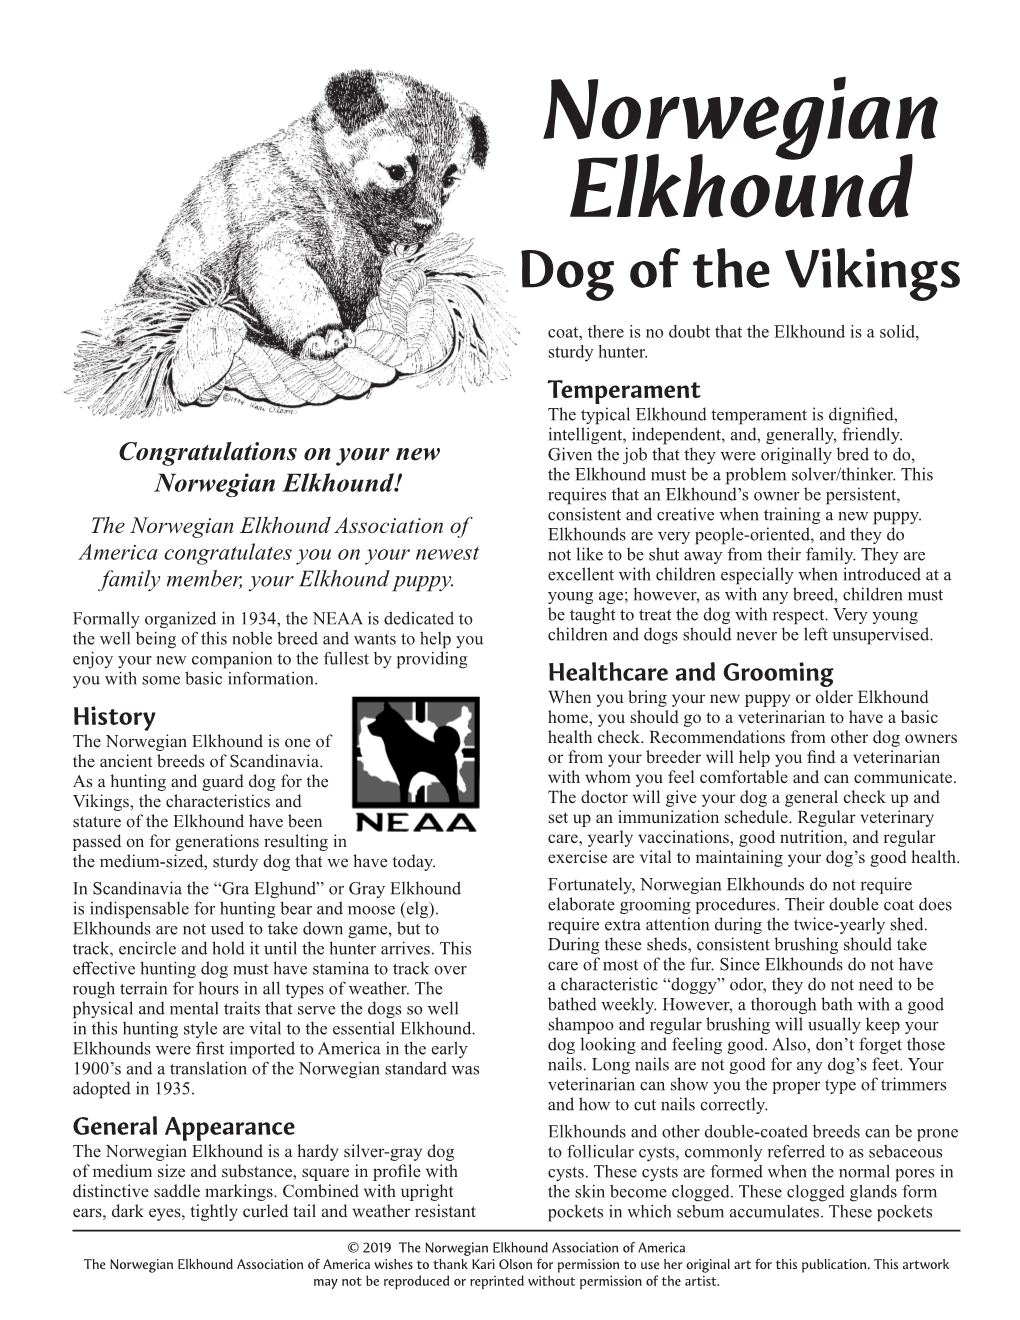 Norwegian Elkhound Dog of the Vikings Coat, There Is No Doubt That the Elkhound Is a Solid, Sturdy Hunter